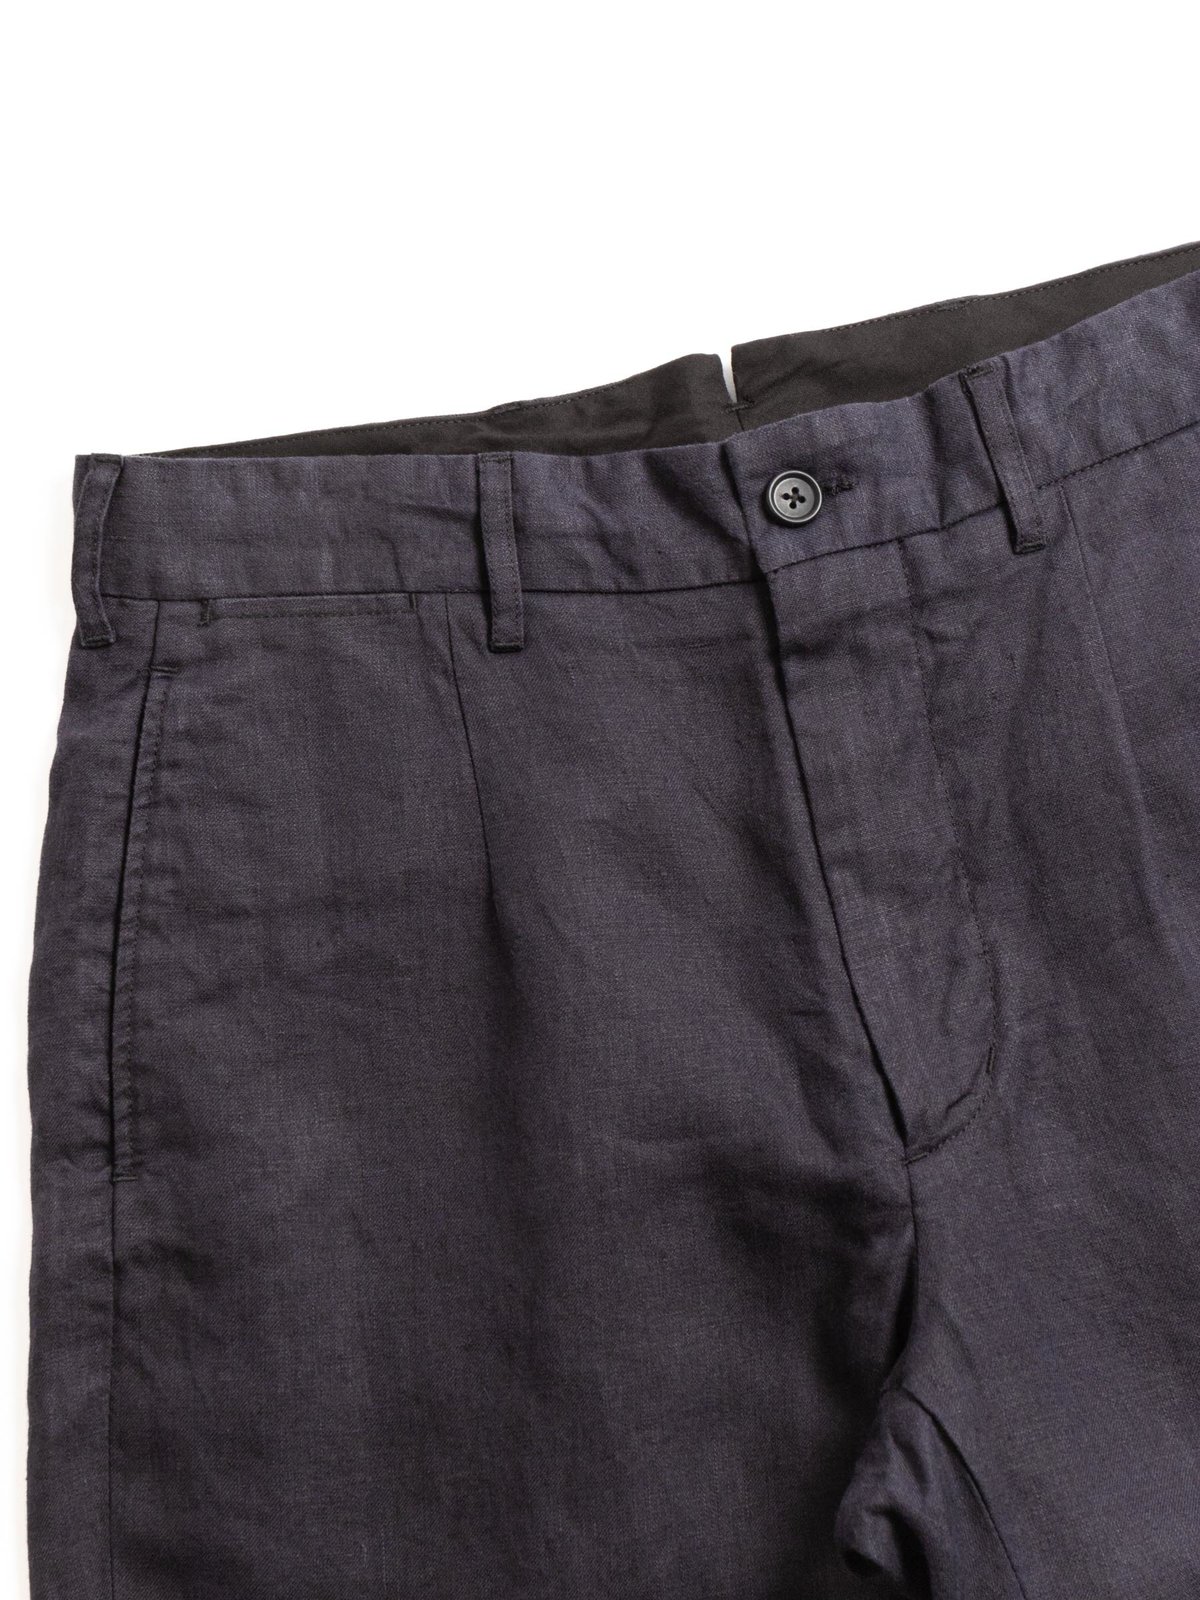 ANDOVER PANT NAVY LINEN TWILL - Image 2